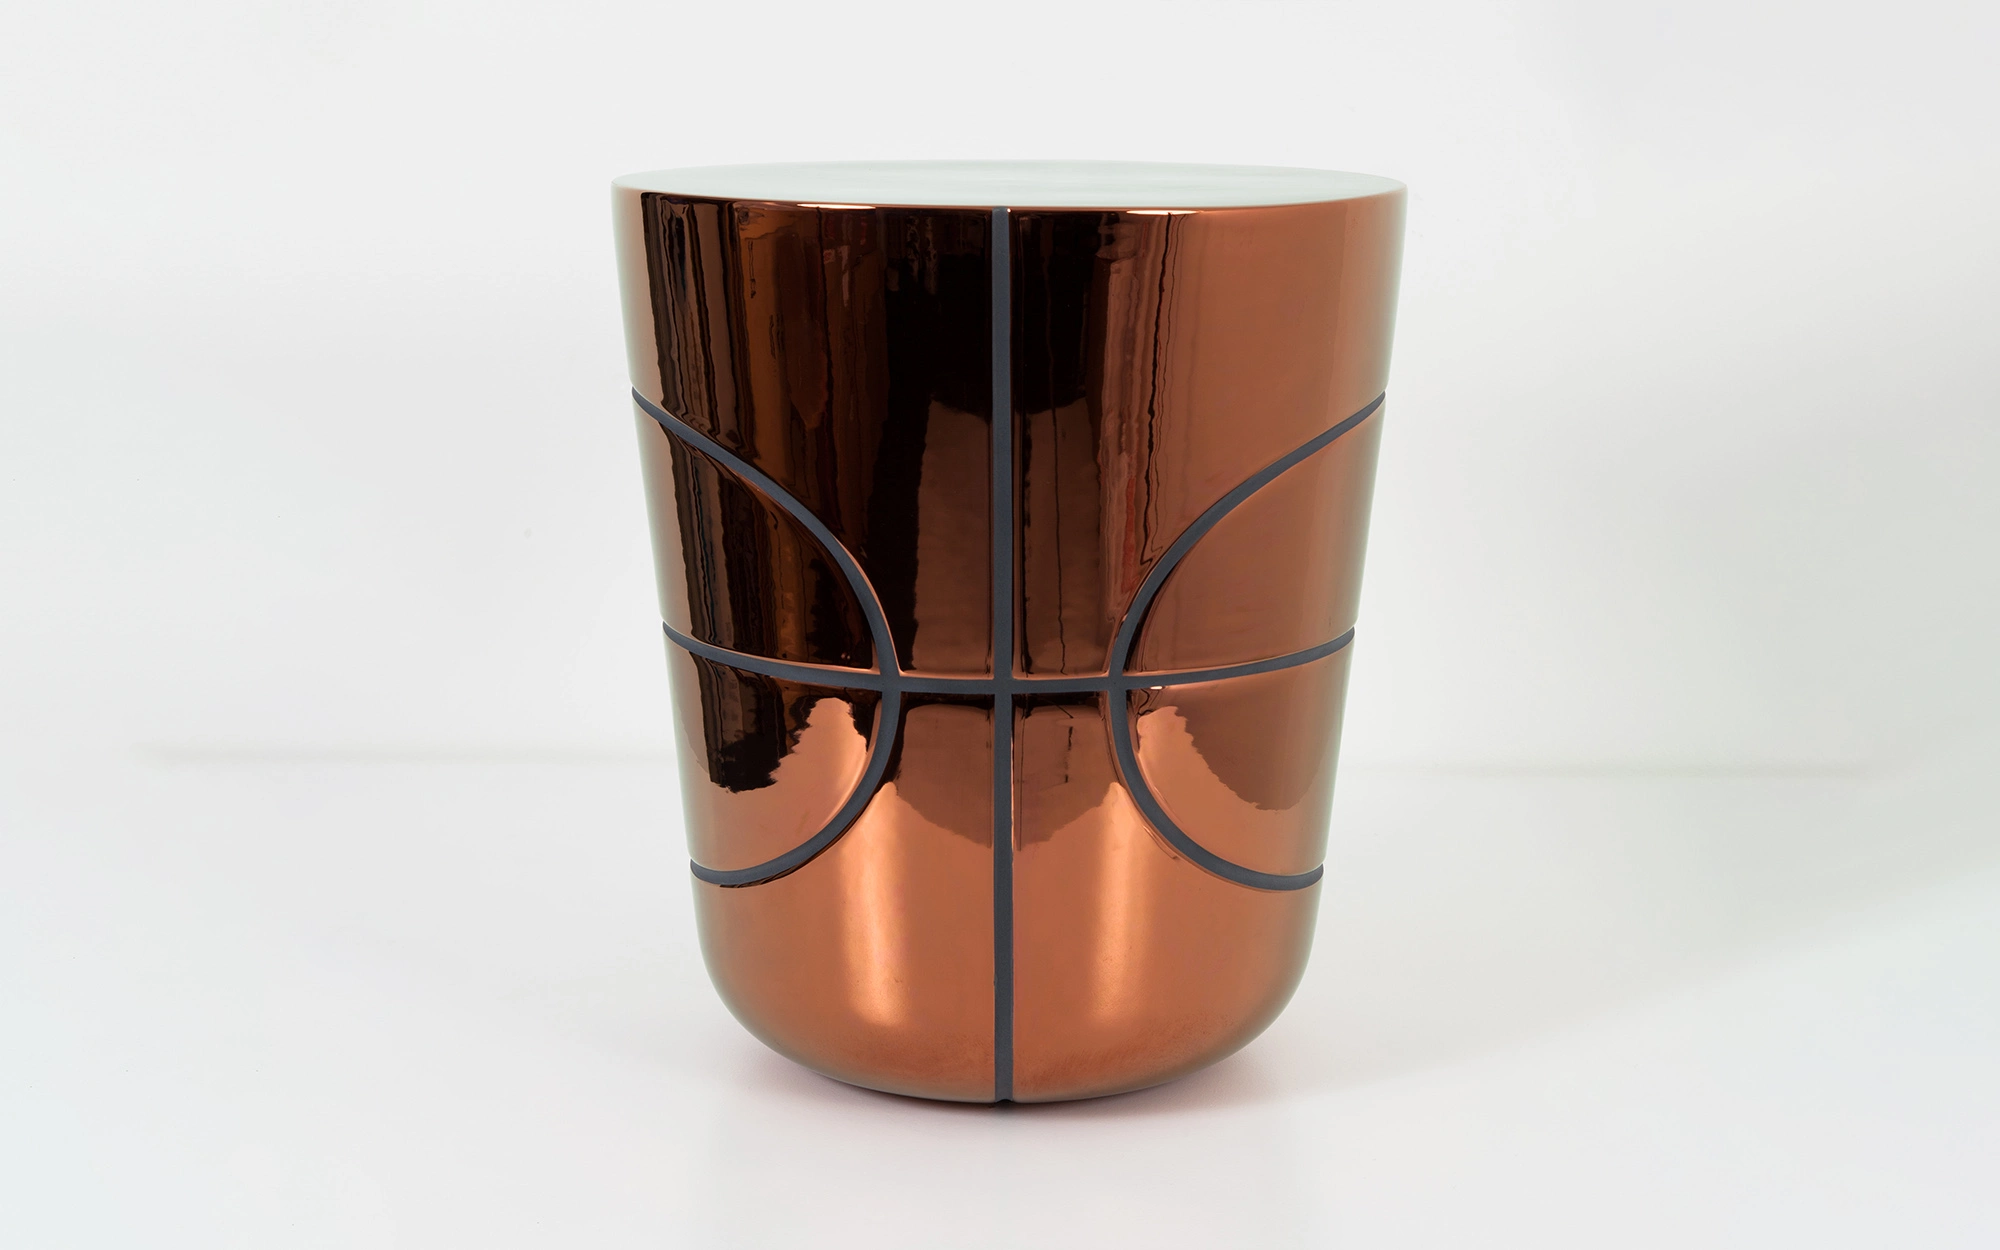 Game On Side Table - Copper Ceramic - Jaime Hayon - Table - Galerie kreo